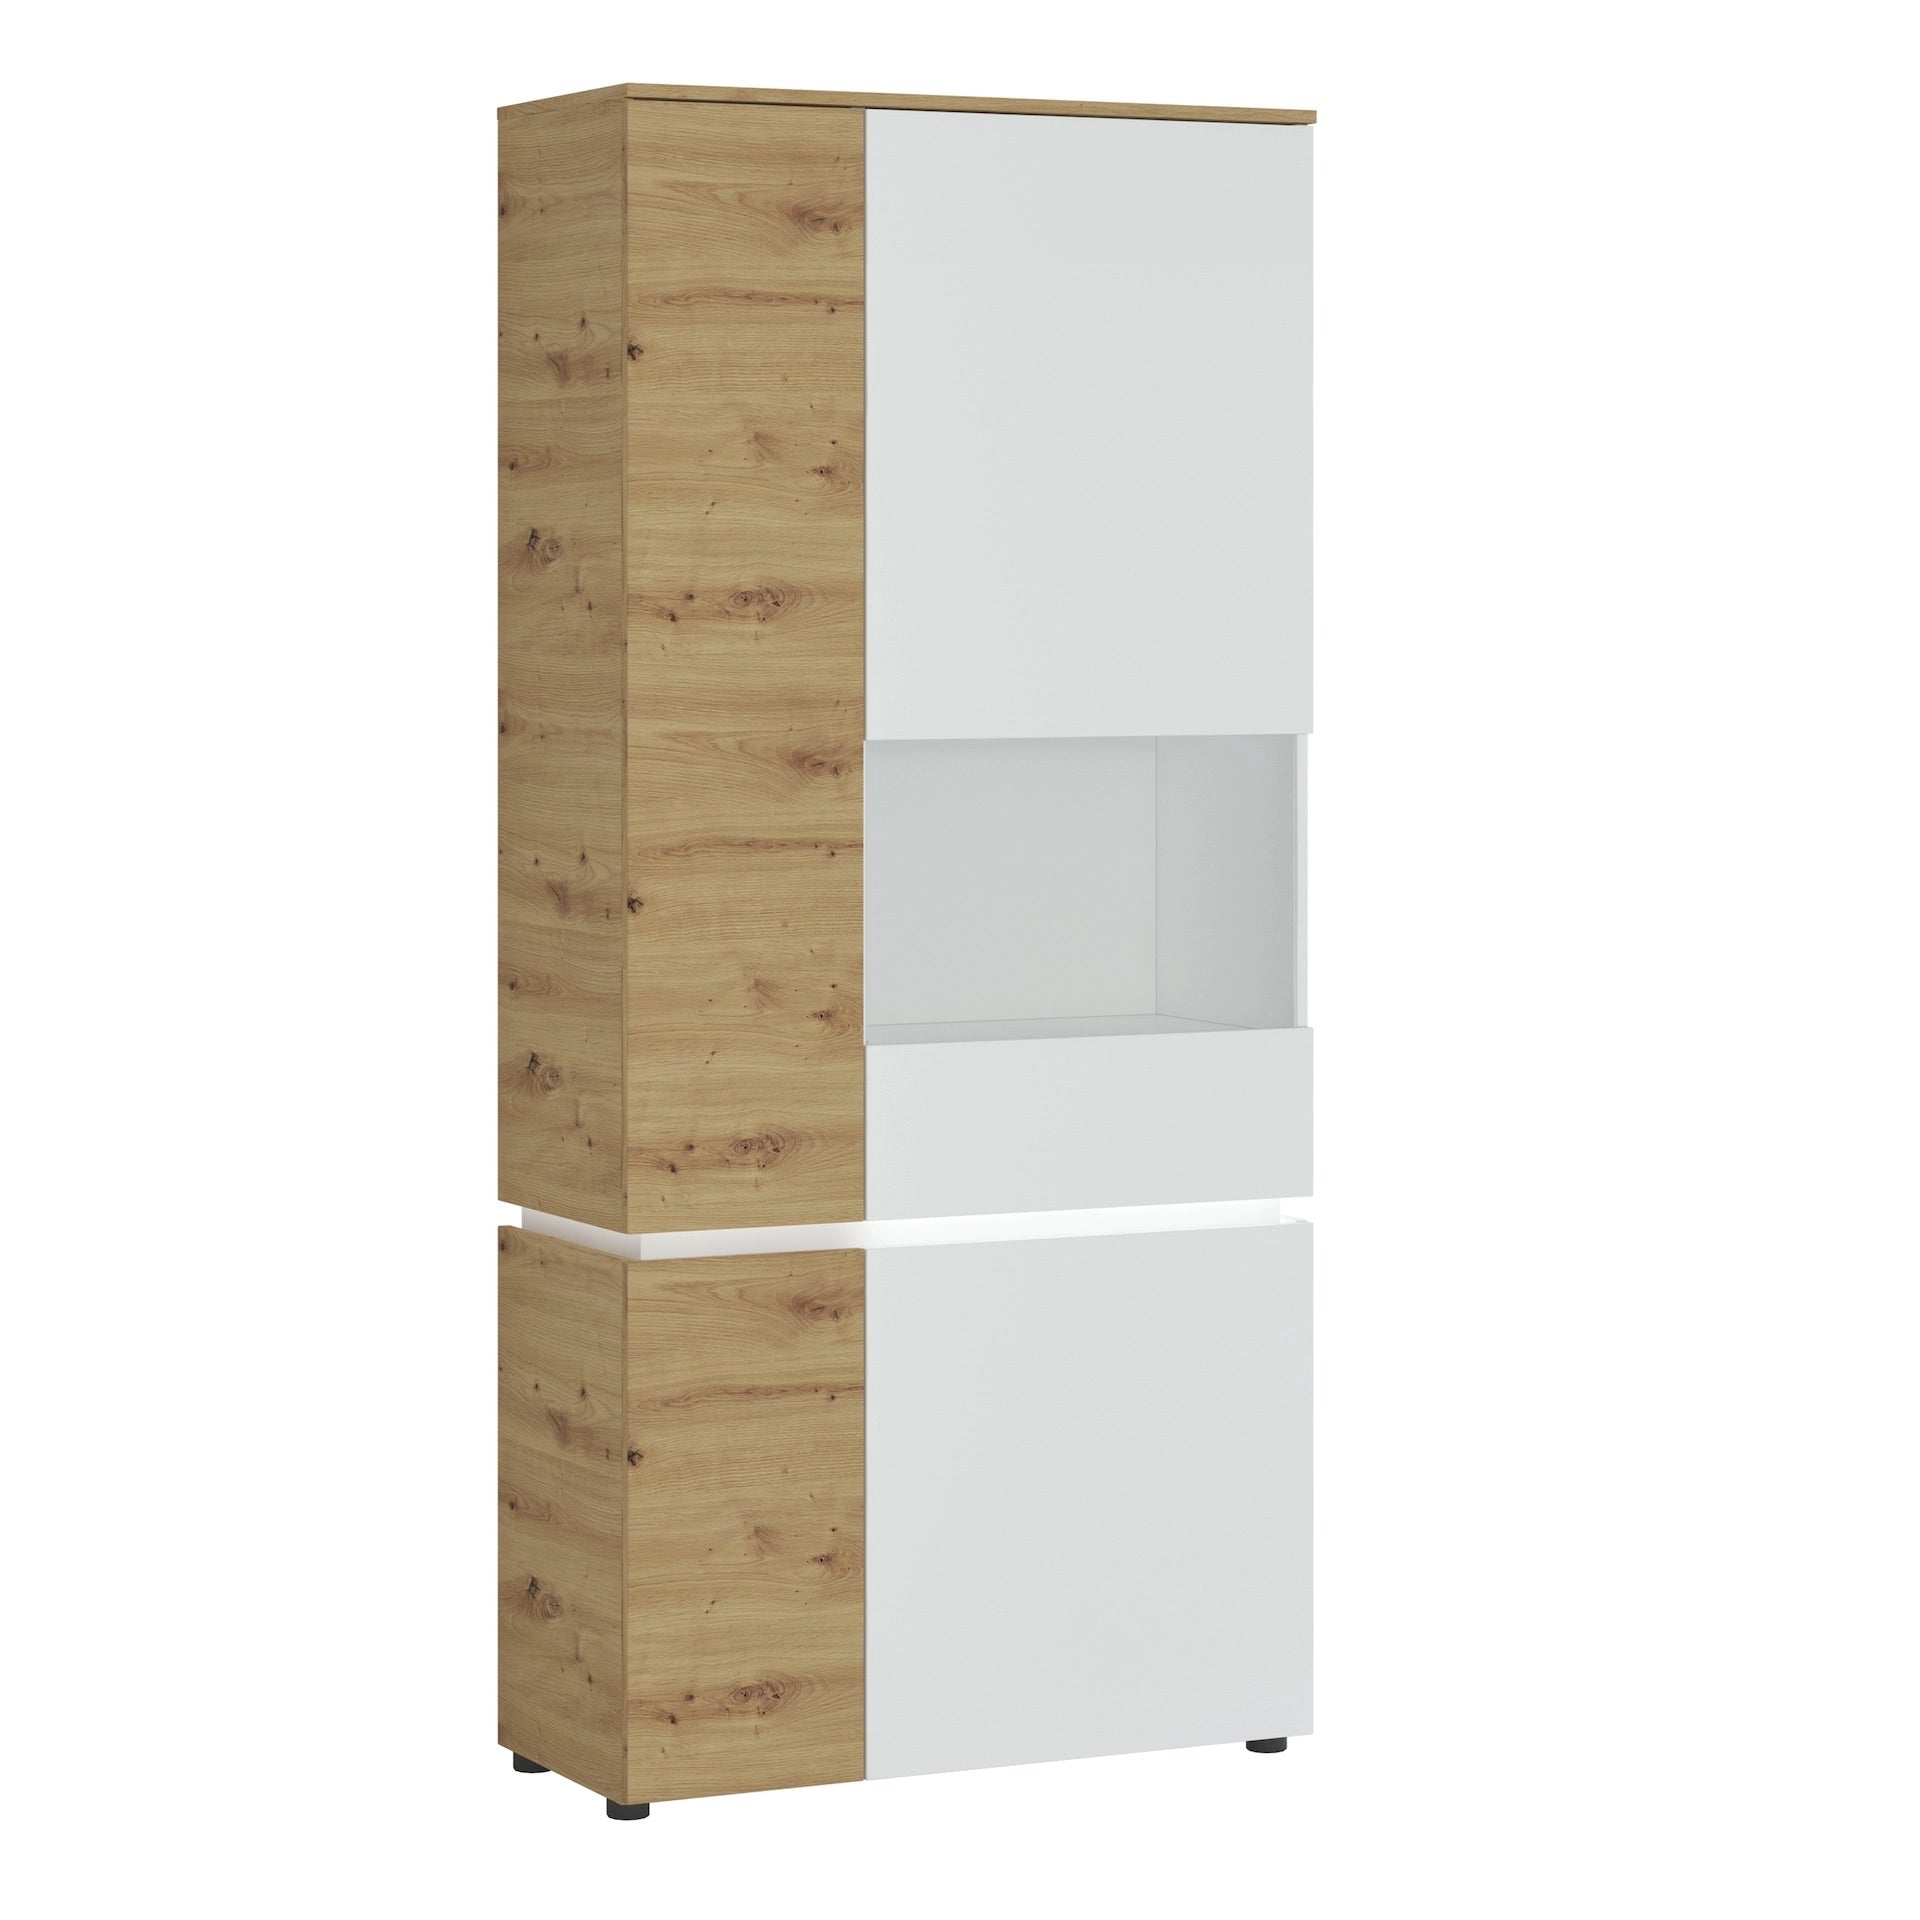 Furniture To Go Luci 4 Door Tall Display Cabinet RH (Including Led Lighting) in White & Oak